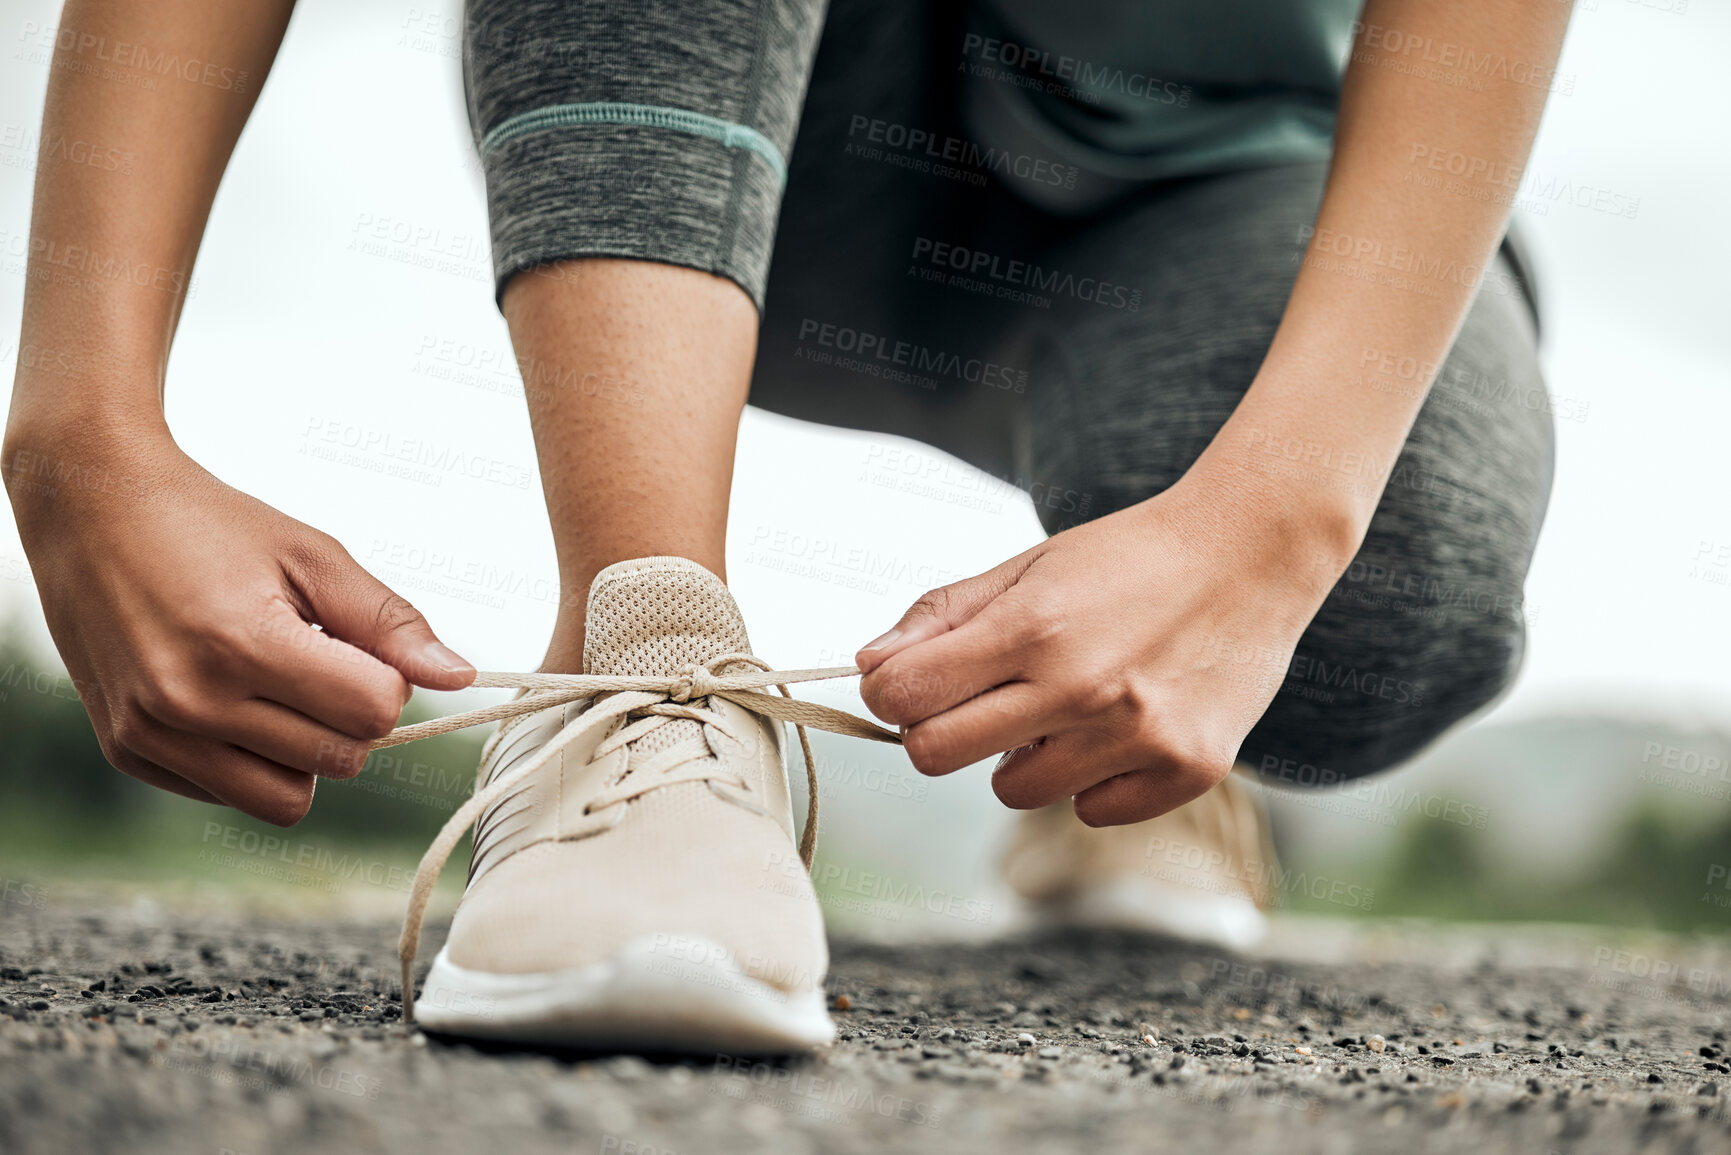 Buy stock photo Shoes, run and a sports woman tying laces outdoor during a fitness workout for endurance or cardio. Exercise, health and training with a female athlete fastening footwear getting ready for running